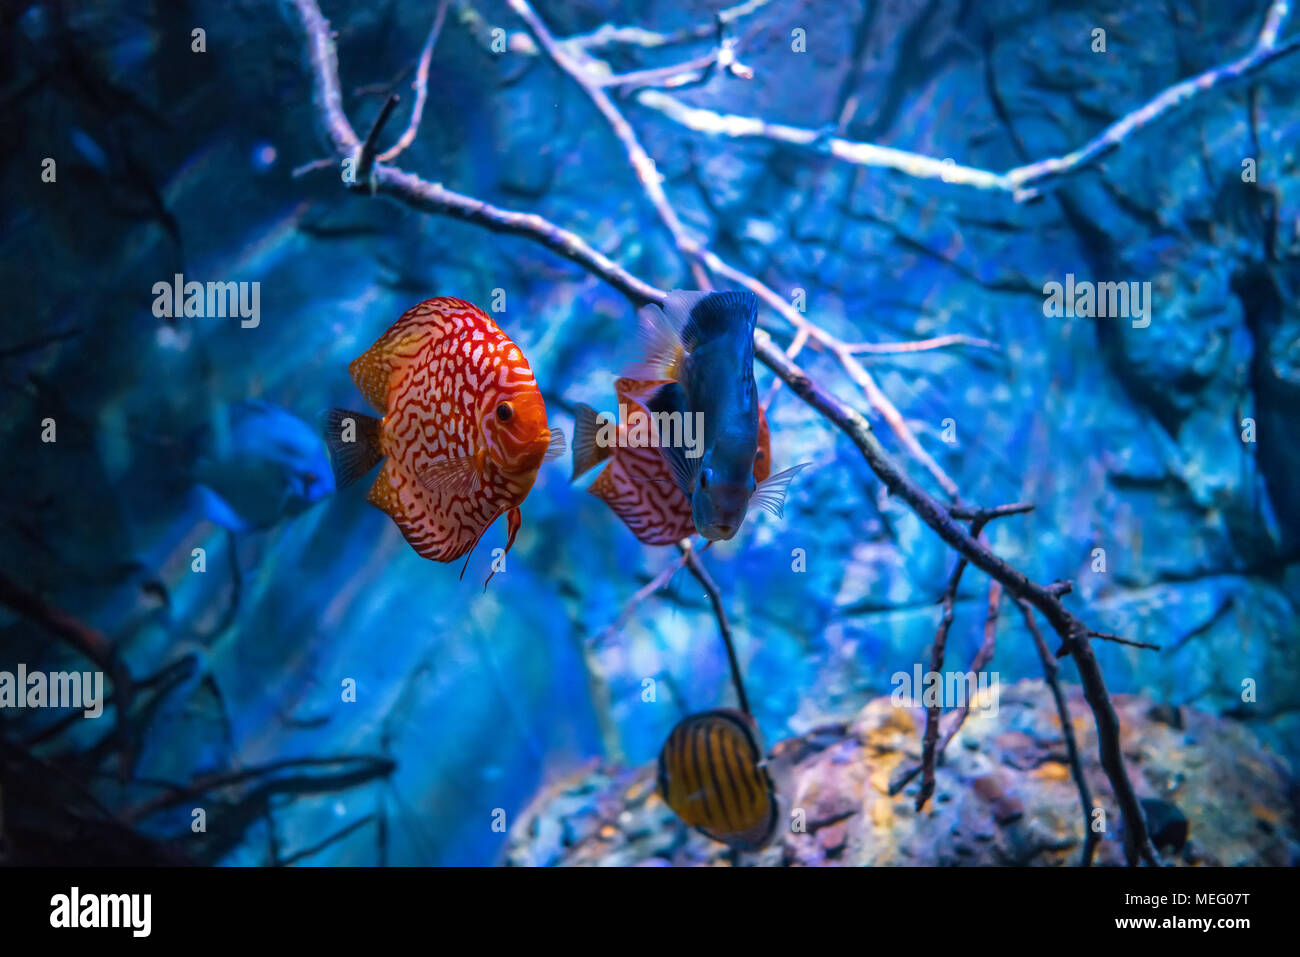 Symphysodon discus in an aquarium on a blue background Stock Photo